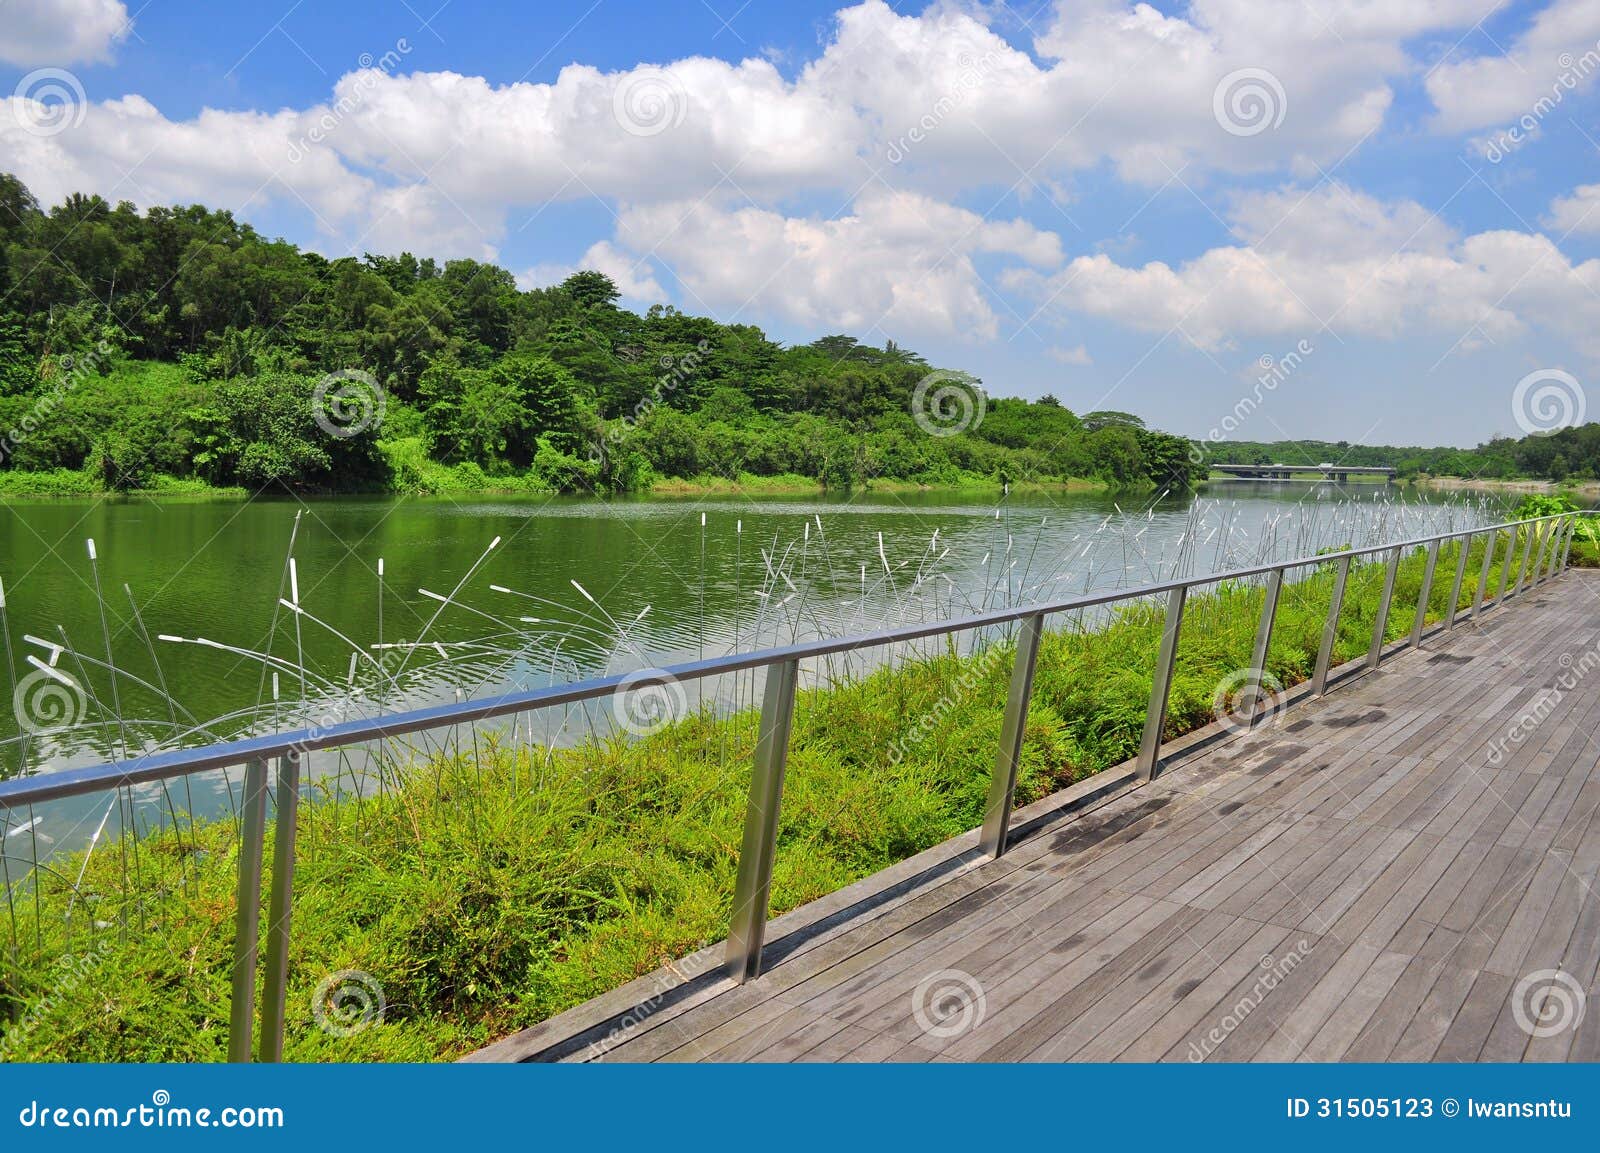 a wooden walkway by the river at punggol waterway